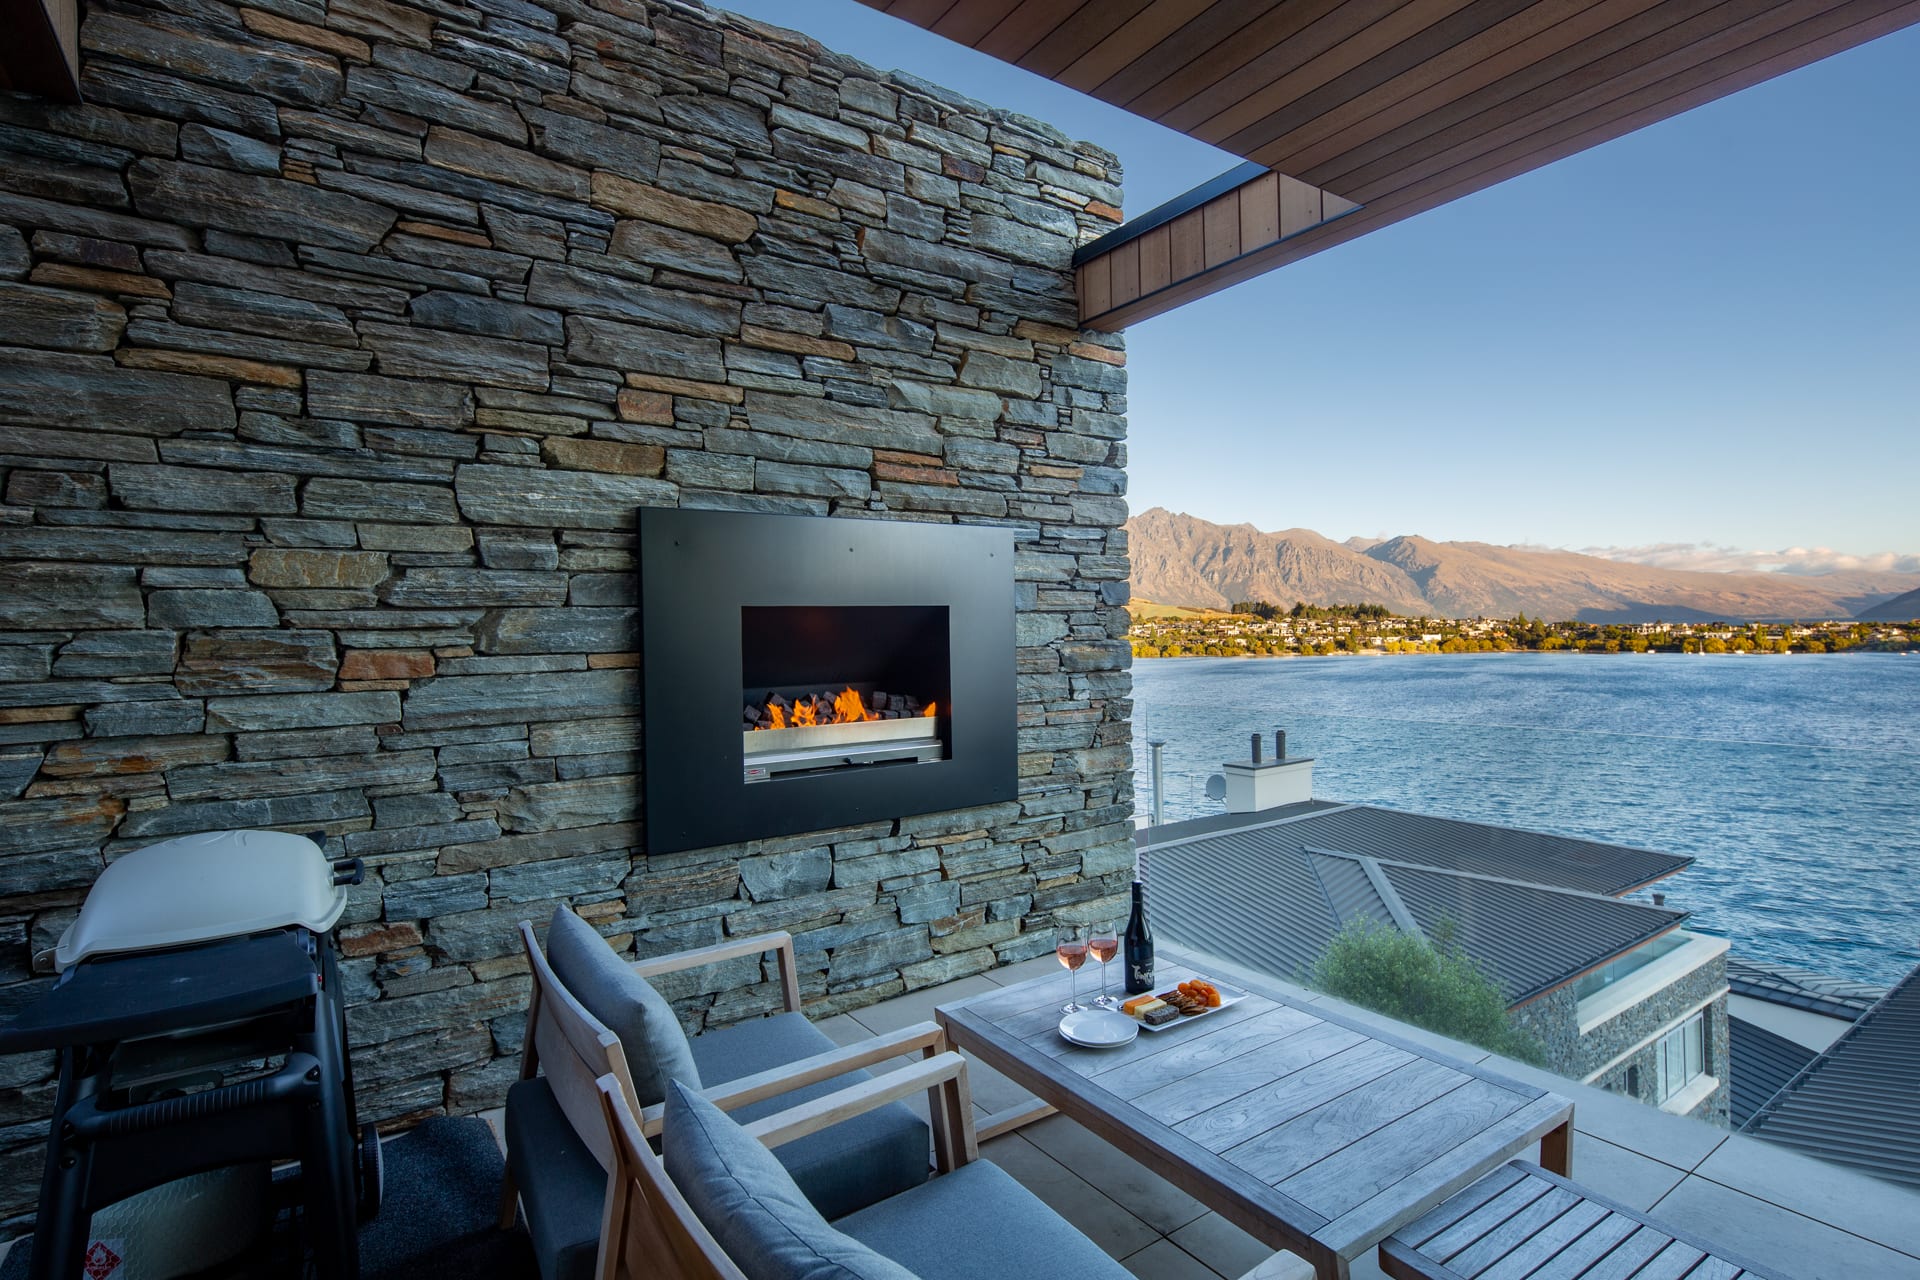 Cozy outdoor fire to enjoy the evenings and views